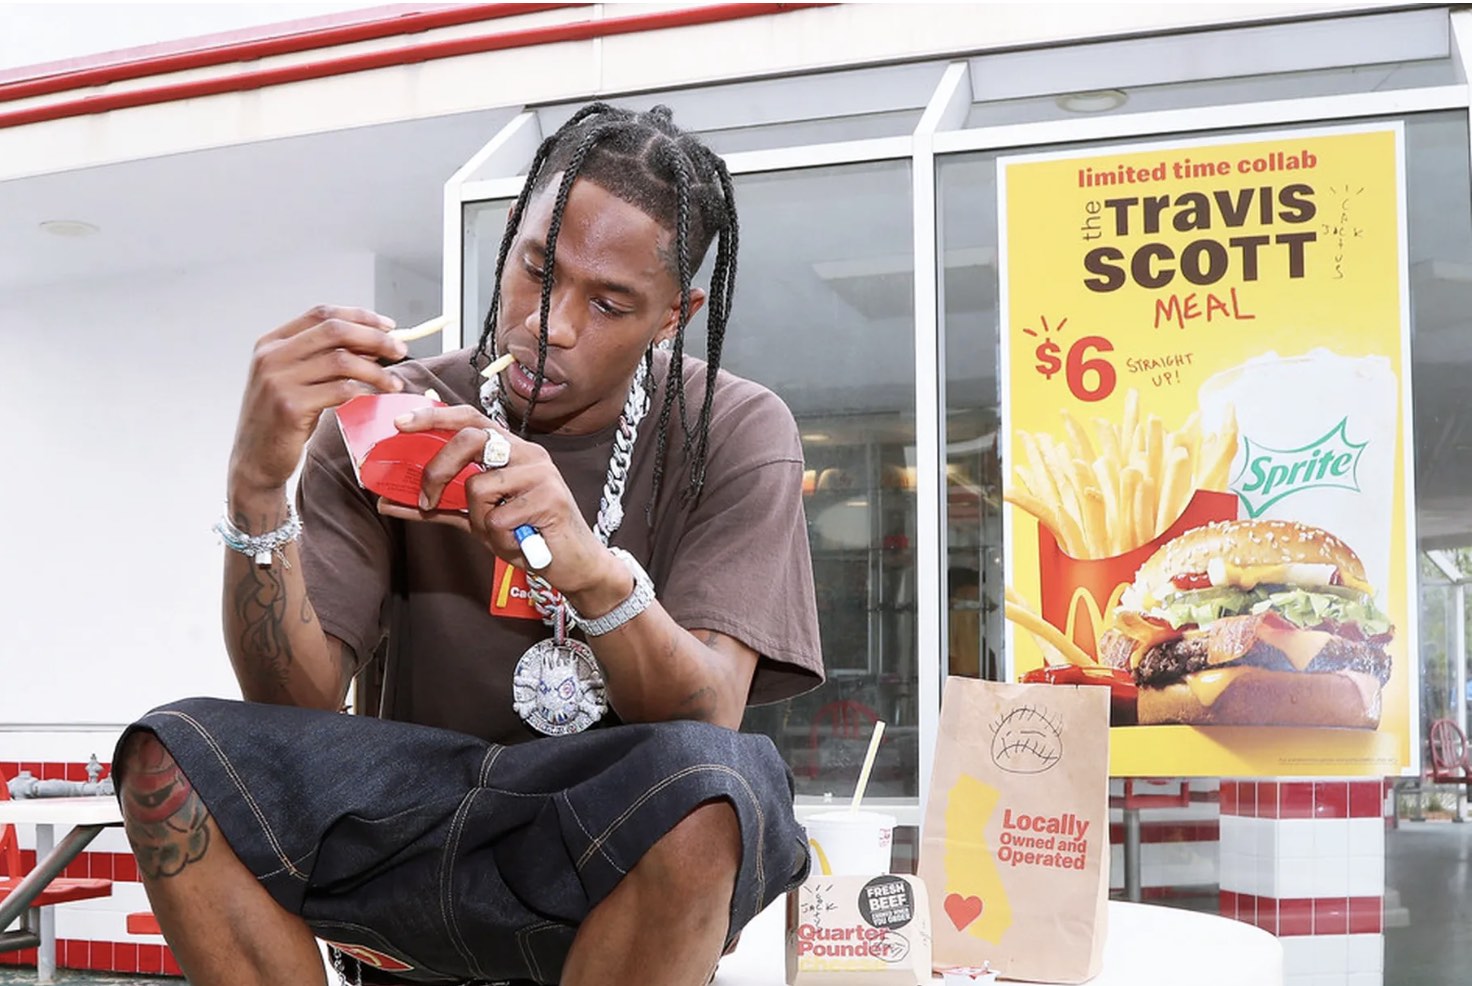 "The Travis Scott Meal" poster